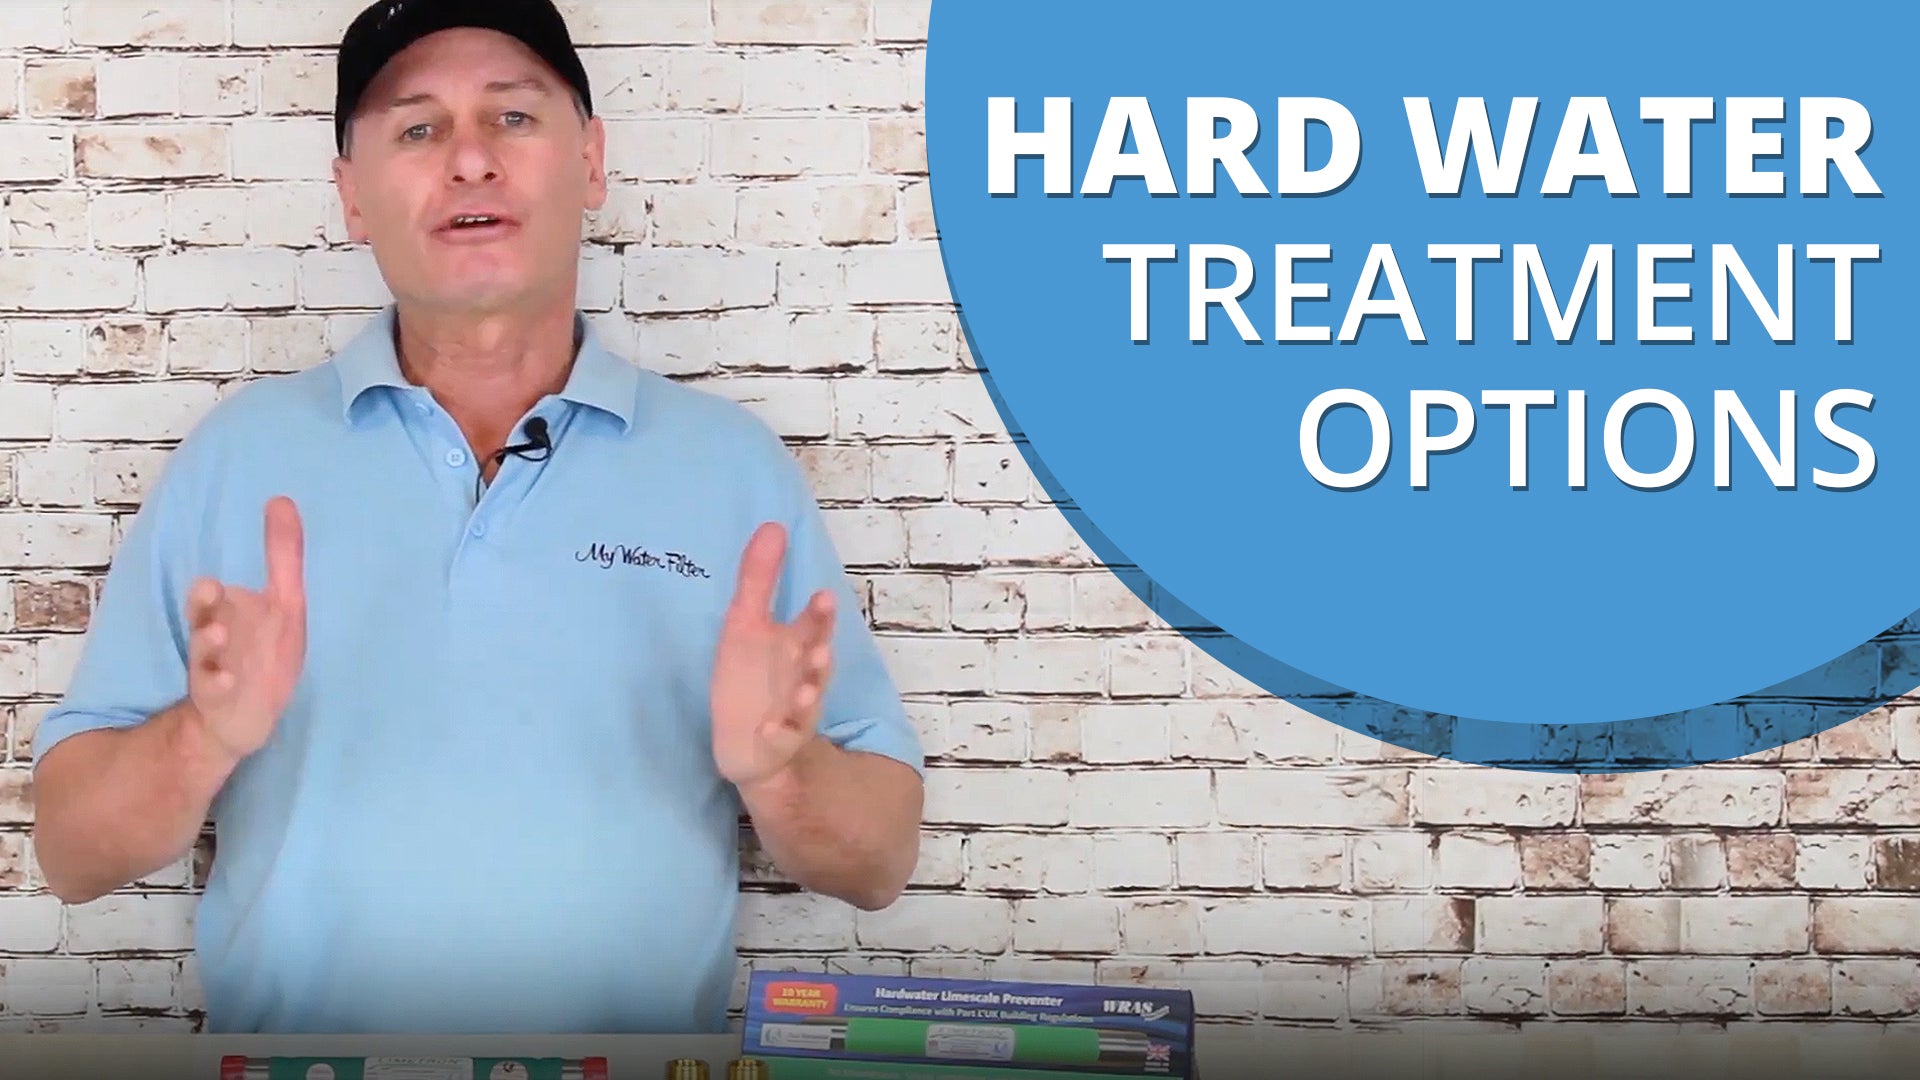 What are the different options available to treat hard water?